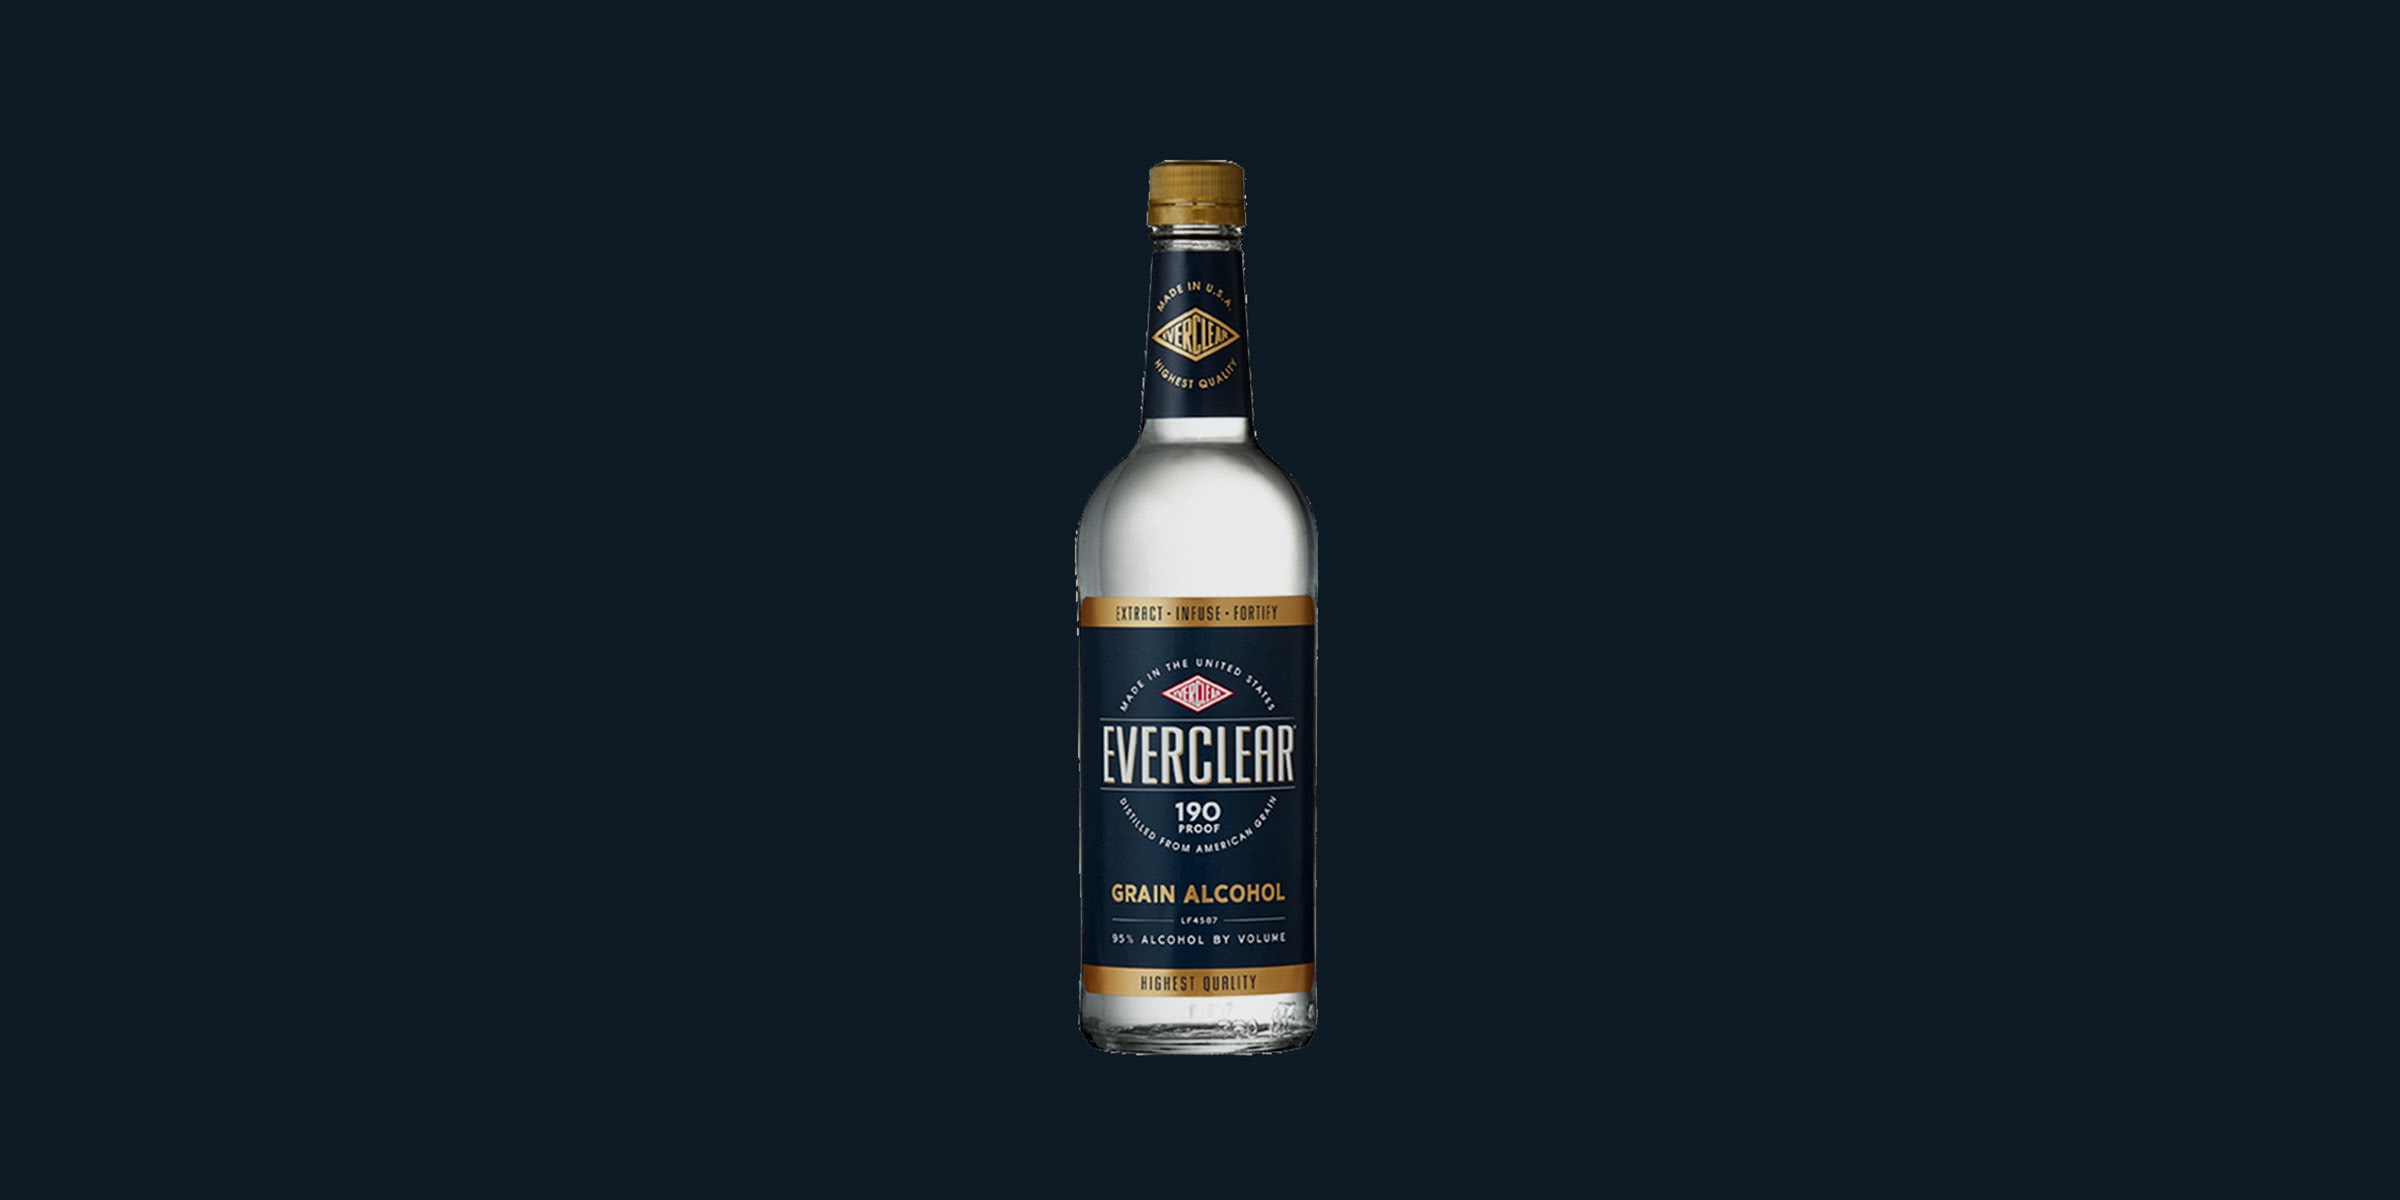 Everclear Price List Find The Perfect Bottle Of Grain Alcohol 2020 Guide